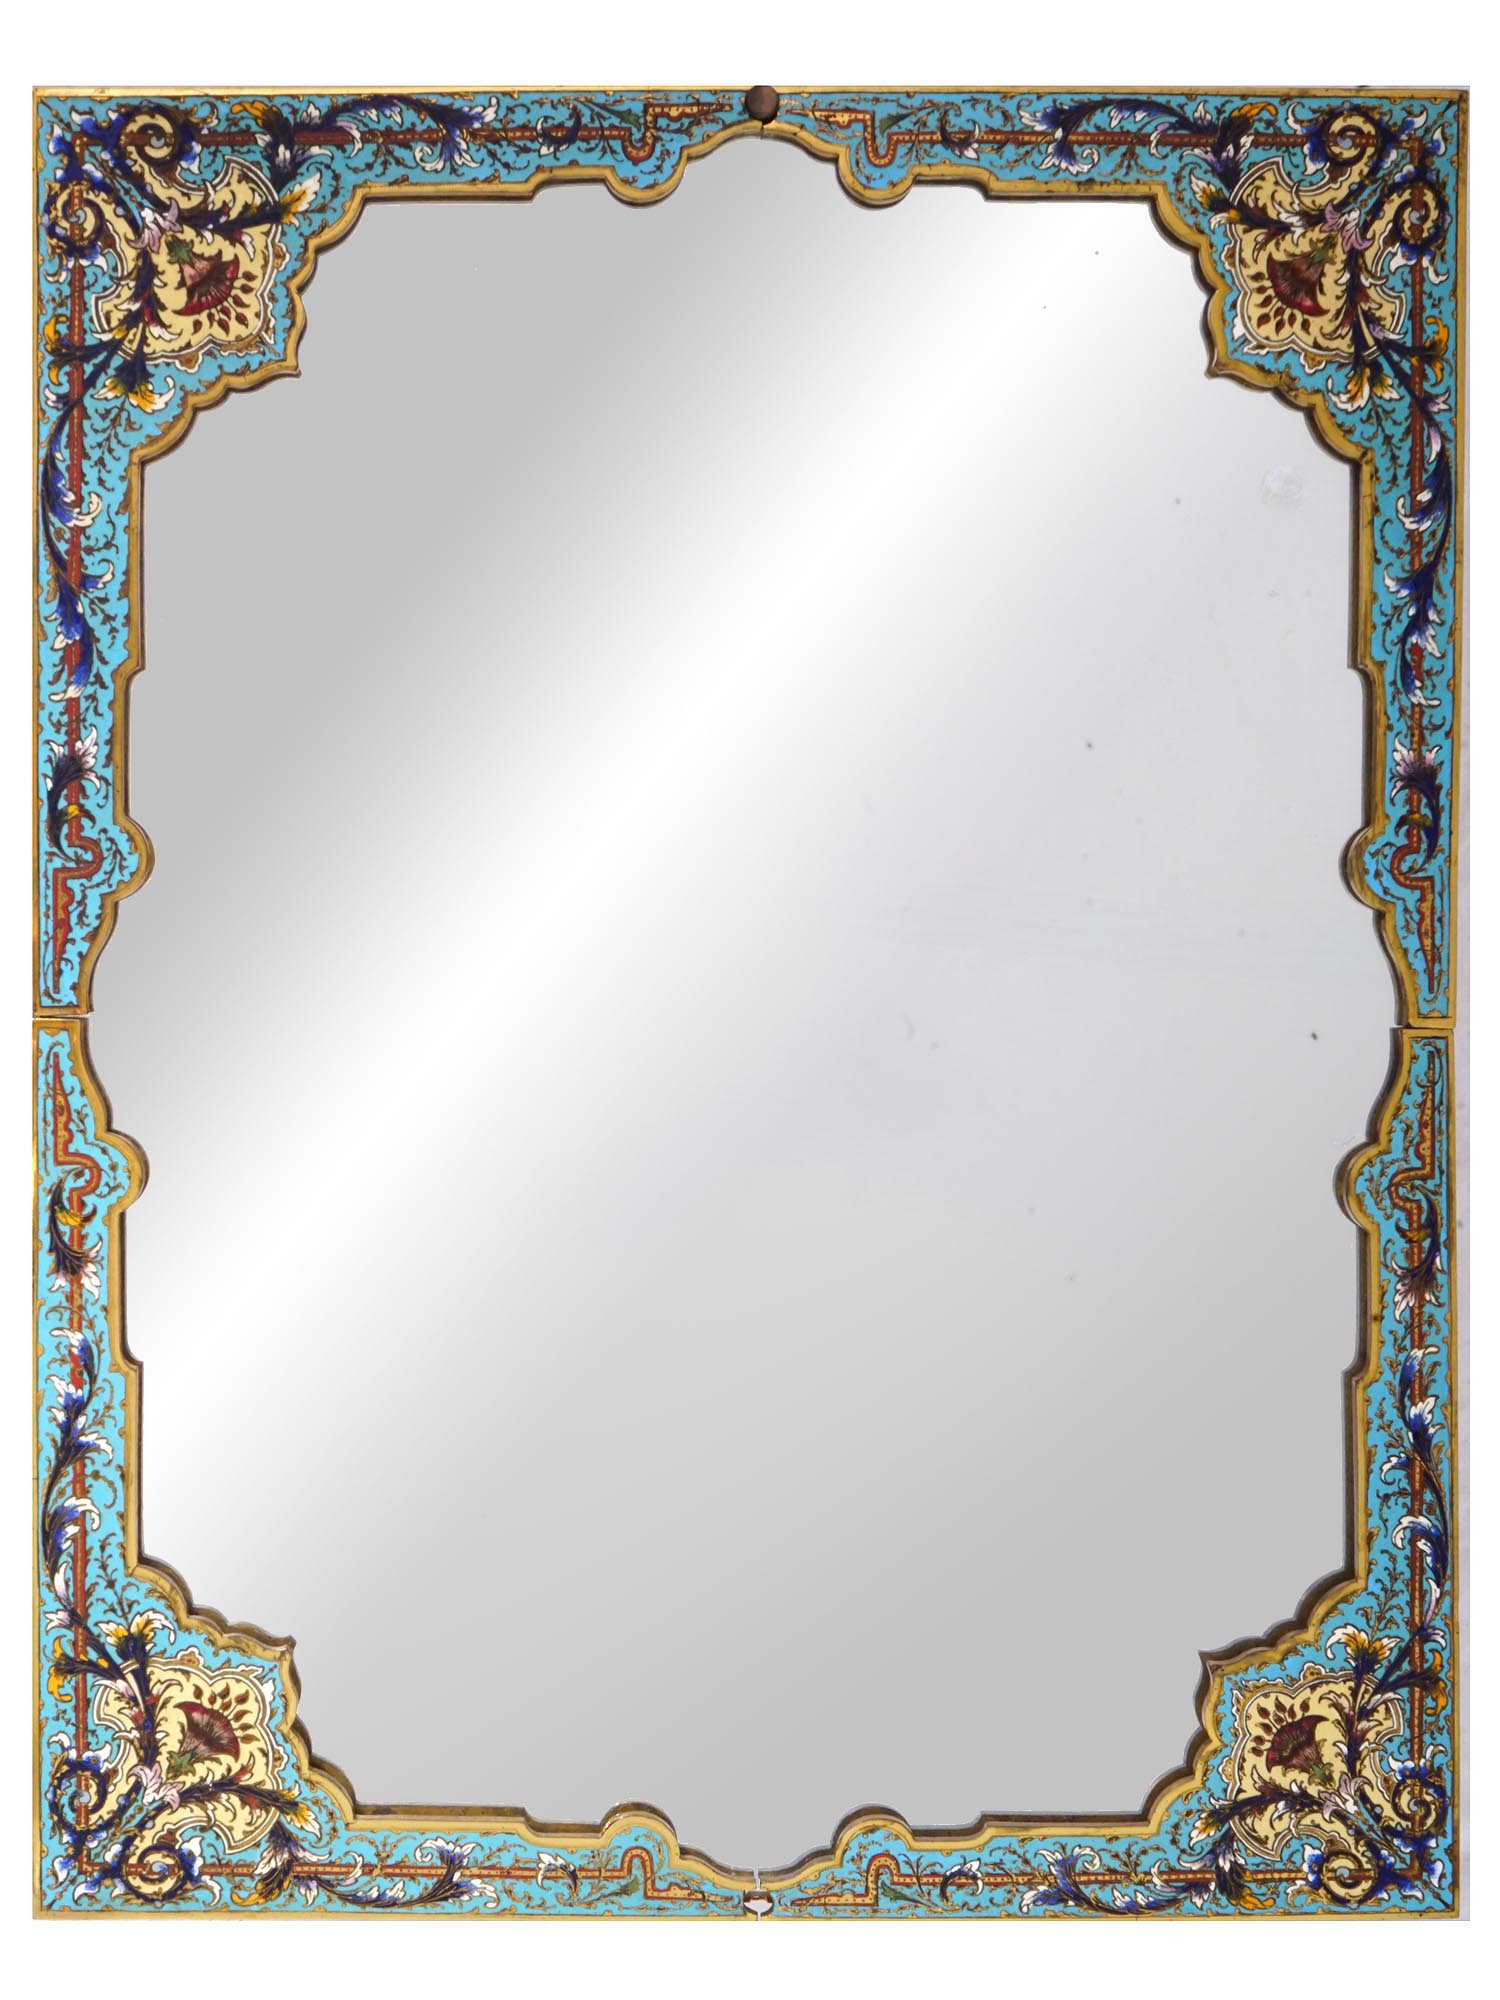 ART NOUVEAU FRENCH CHAMPLEVE ENAMEL WALL MIRROR PIC-0